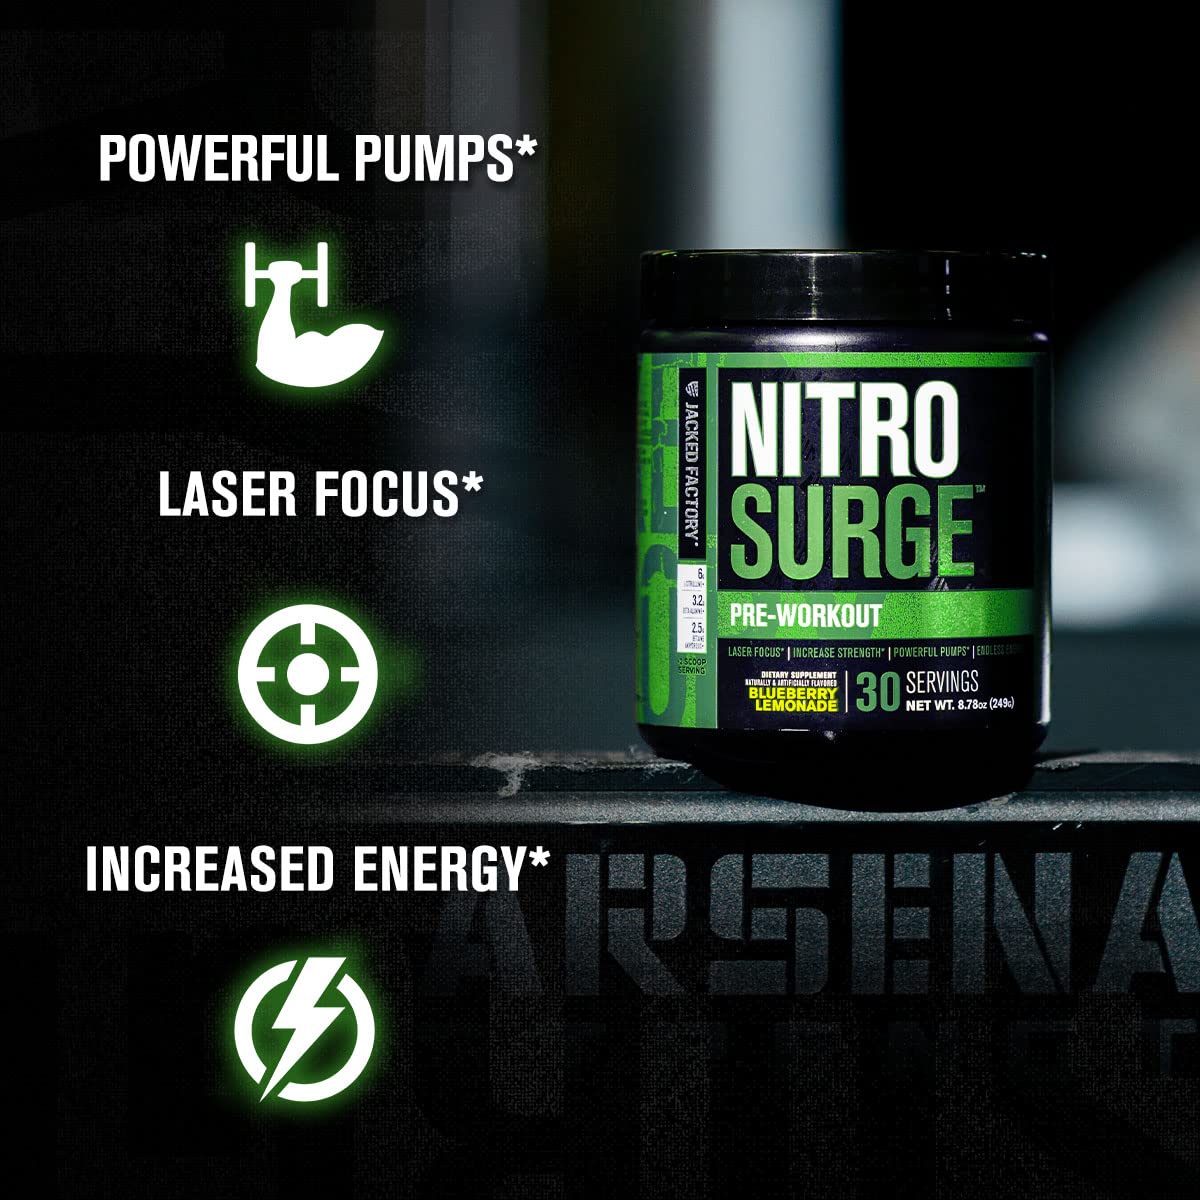 Jacked Factory Nitrosurge Pre-Workout in Strawberry Margarita & BCAA in Fruit Punch for Muscle Building and Recovery